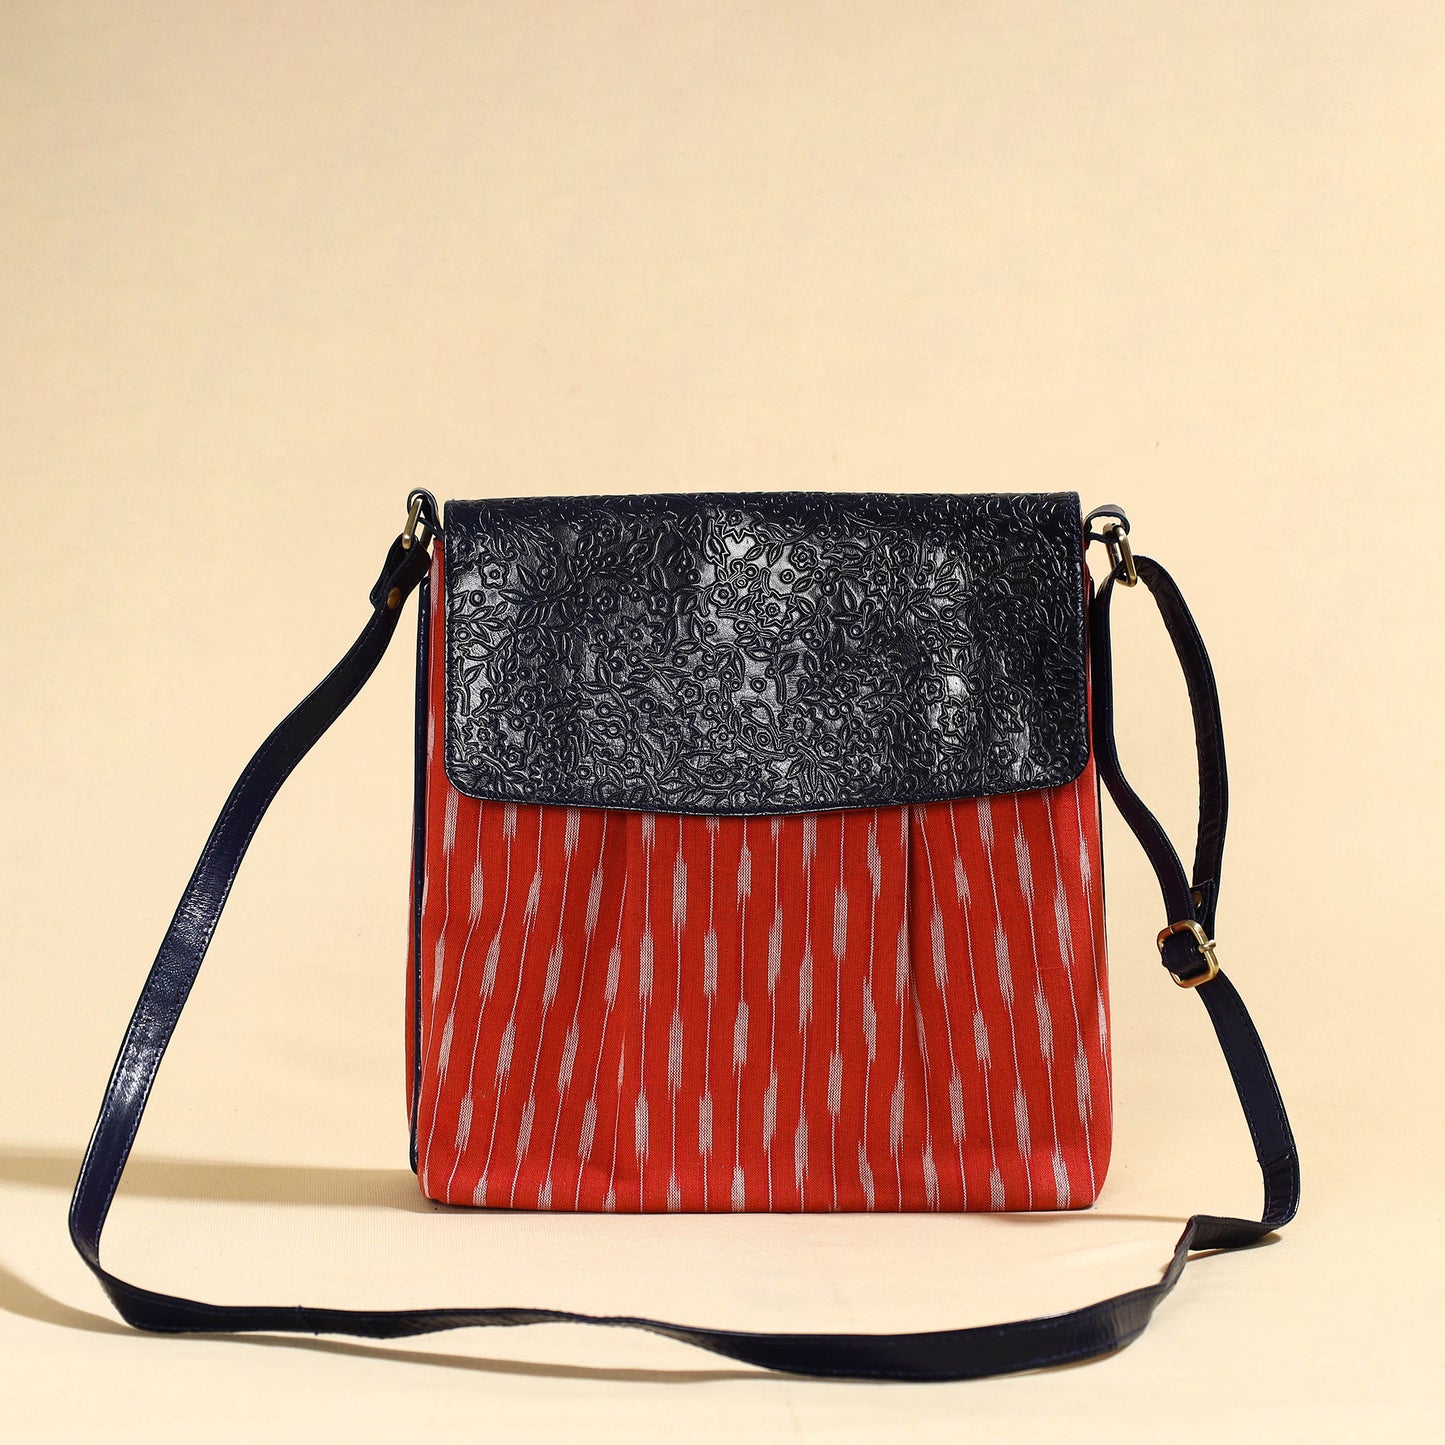 Red - Handcrafted Ikat Fabric Sling Bag with Embossed Leather Flap